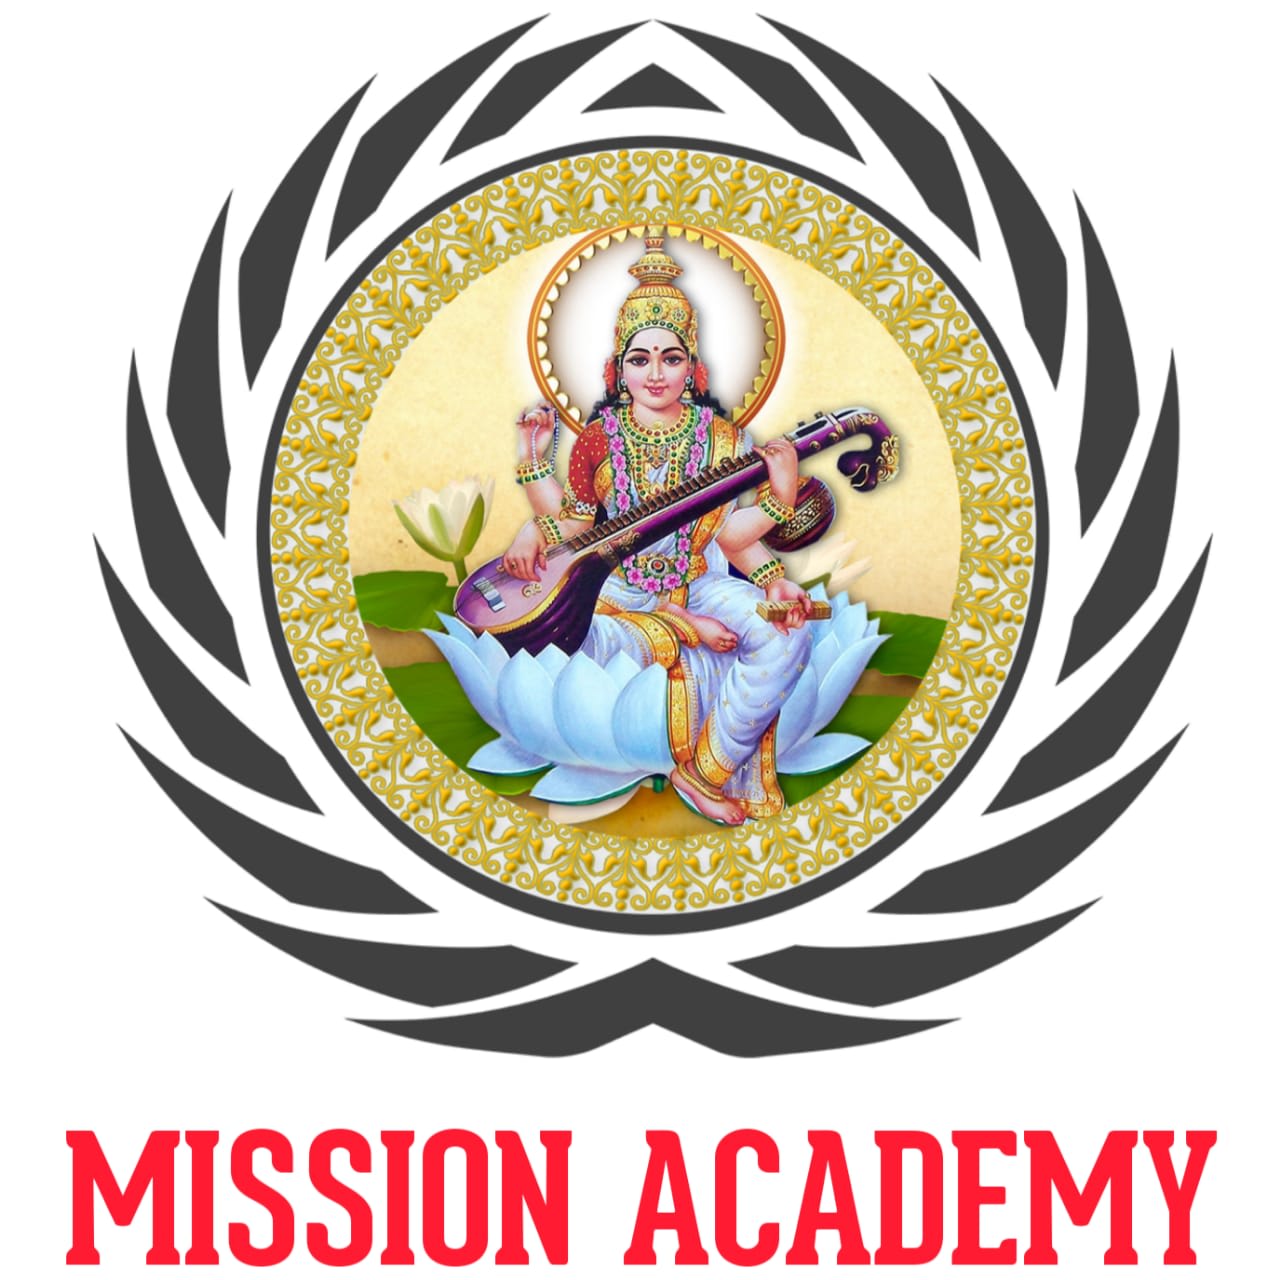 MISSION ACADEMY